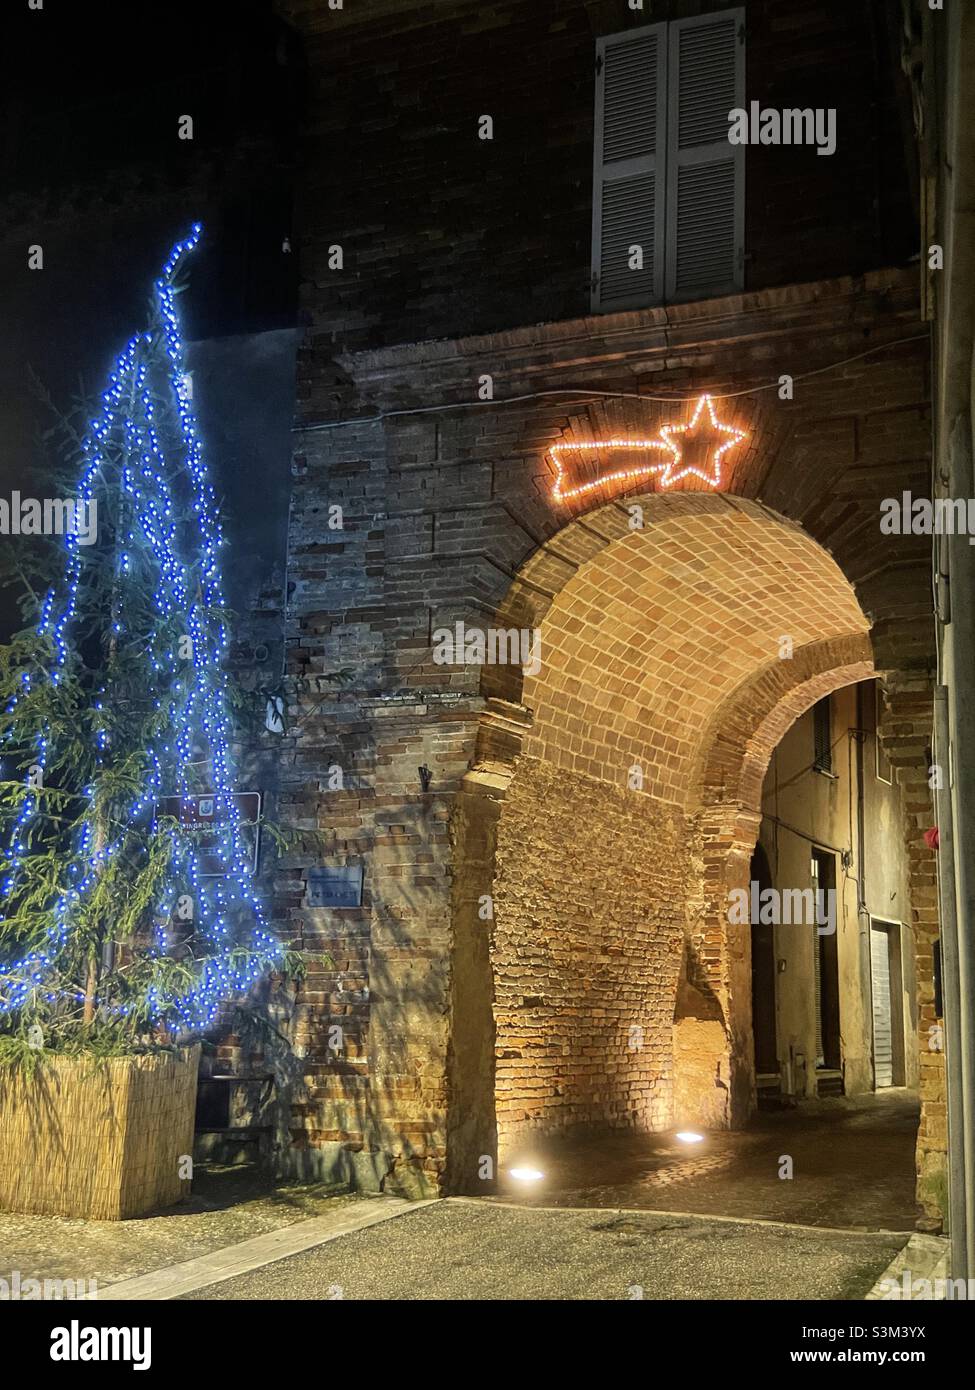 Christmas ornaments at the entrance of the old village of Massignano, Marche region, Italy Stock Photo